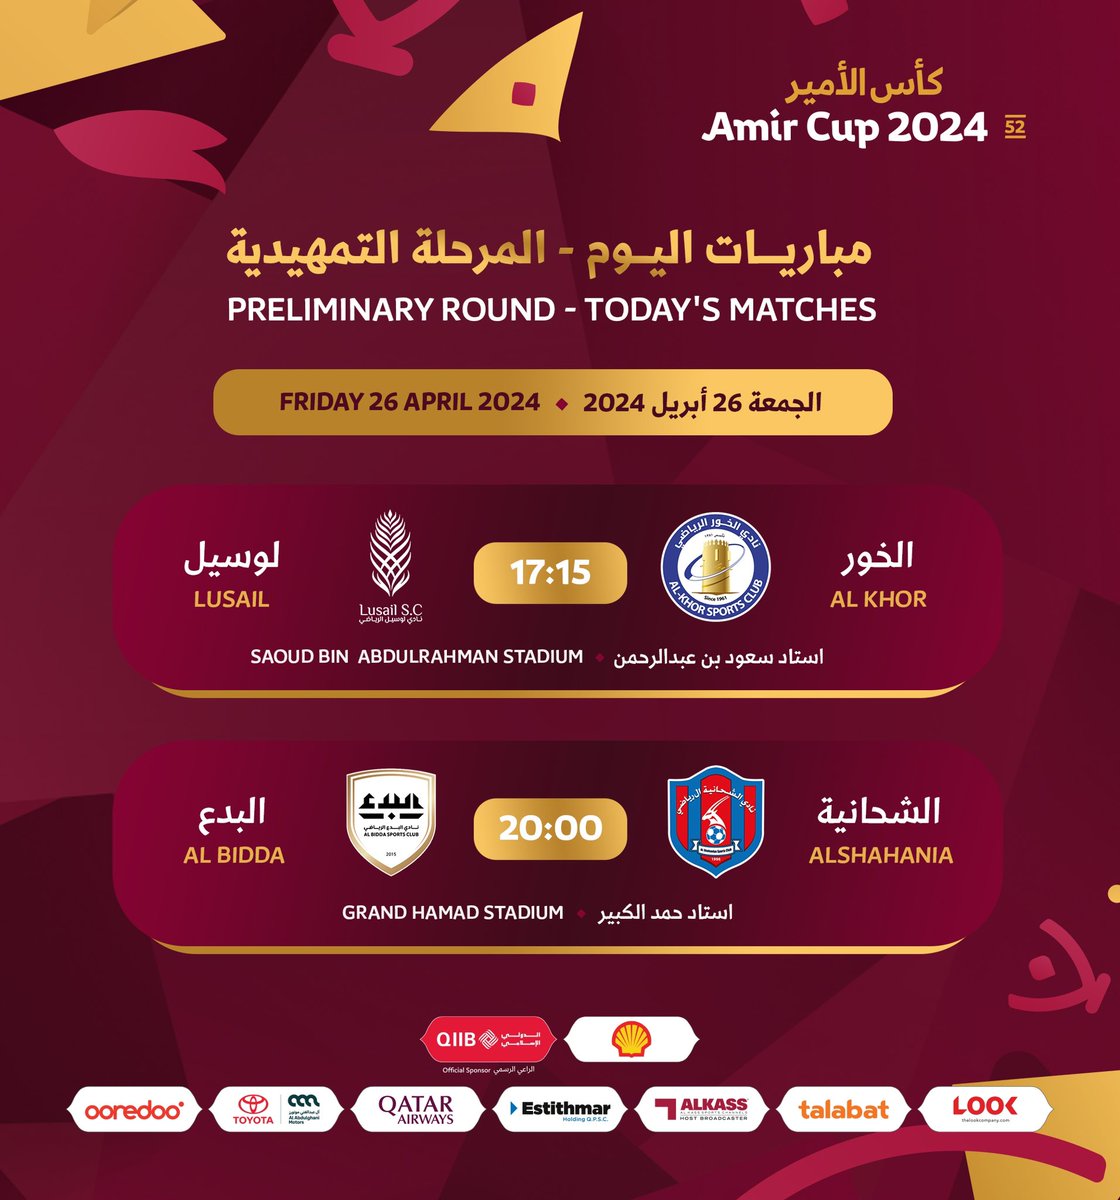 🗒 - Today's matches from the preliminary stage of #Amir_Cup 🏆.